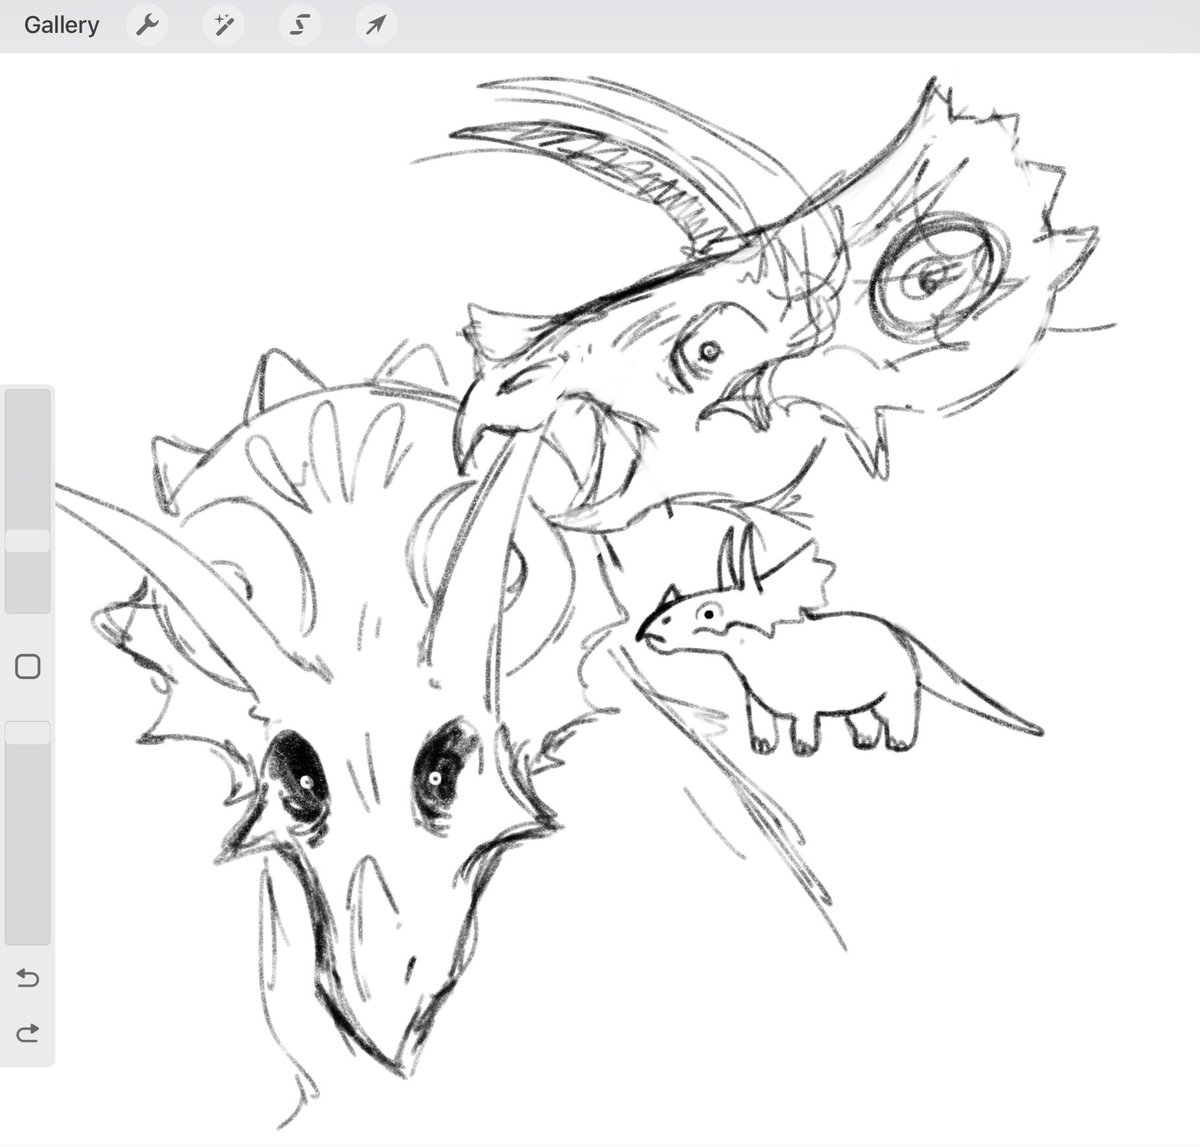 sketching beasts and trying to warm up to do things 